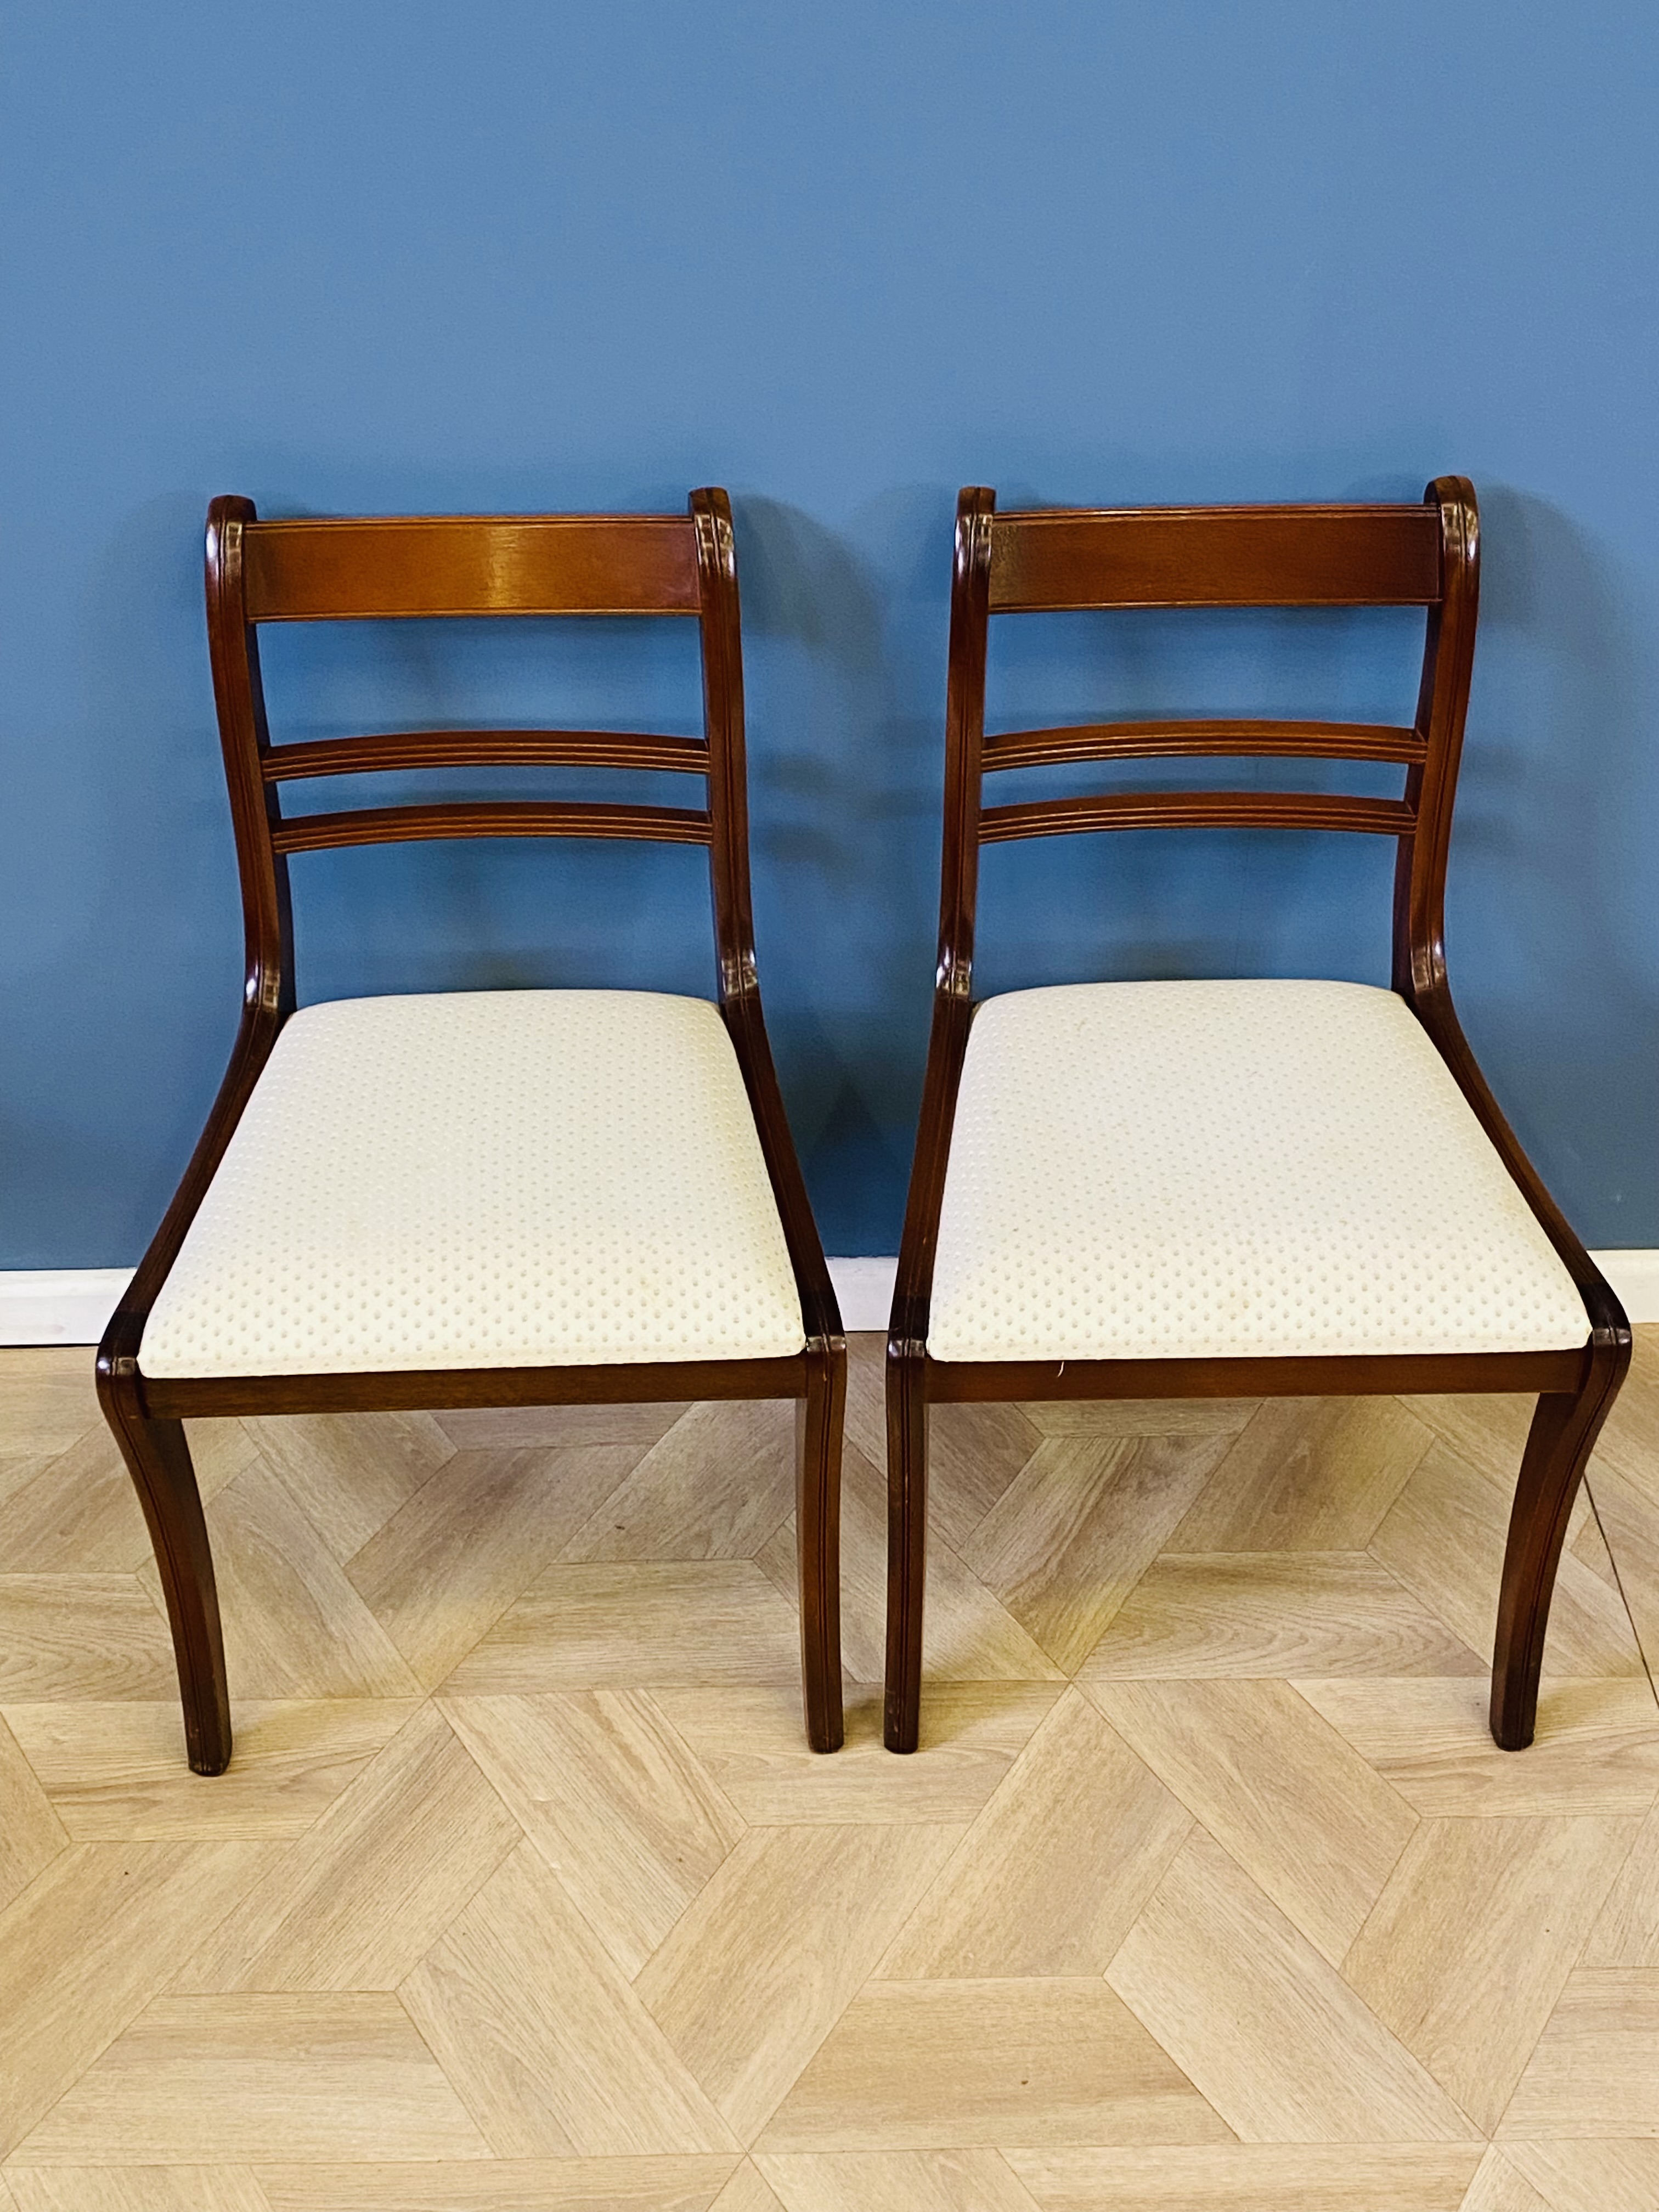 Set of six mahogany Regency style dining chairs - Image 6 of 7